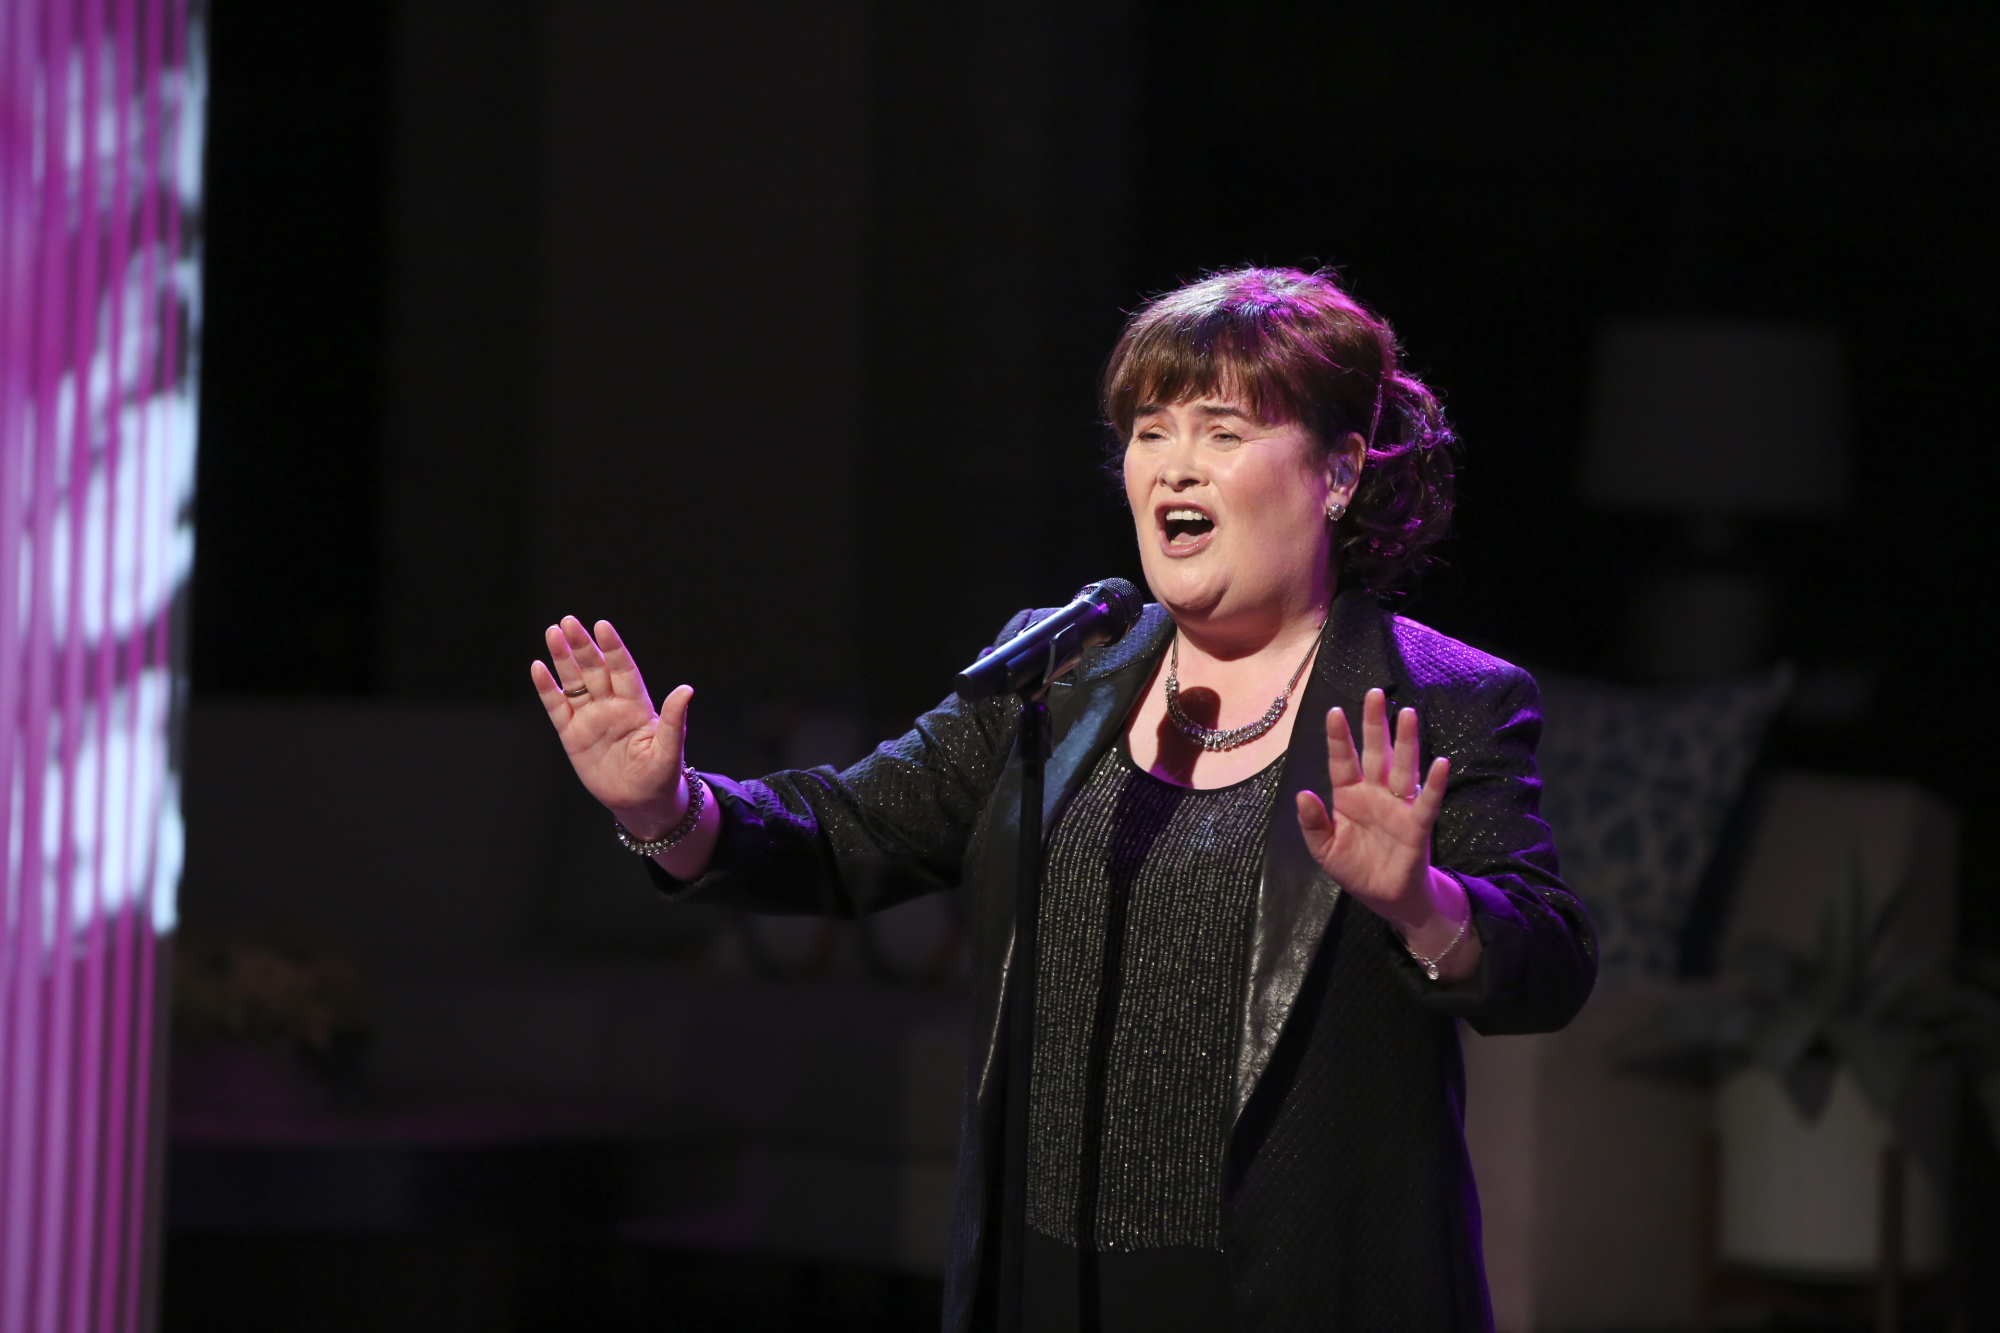 Susan Boyle performs on "The Talk" on October 6, 2014 in Los Angeles, California | Source: Getty Images